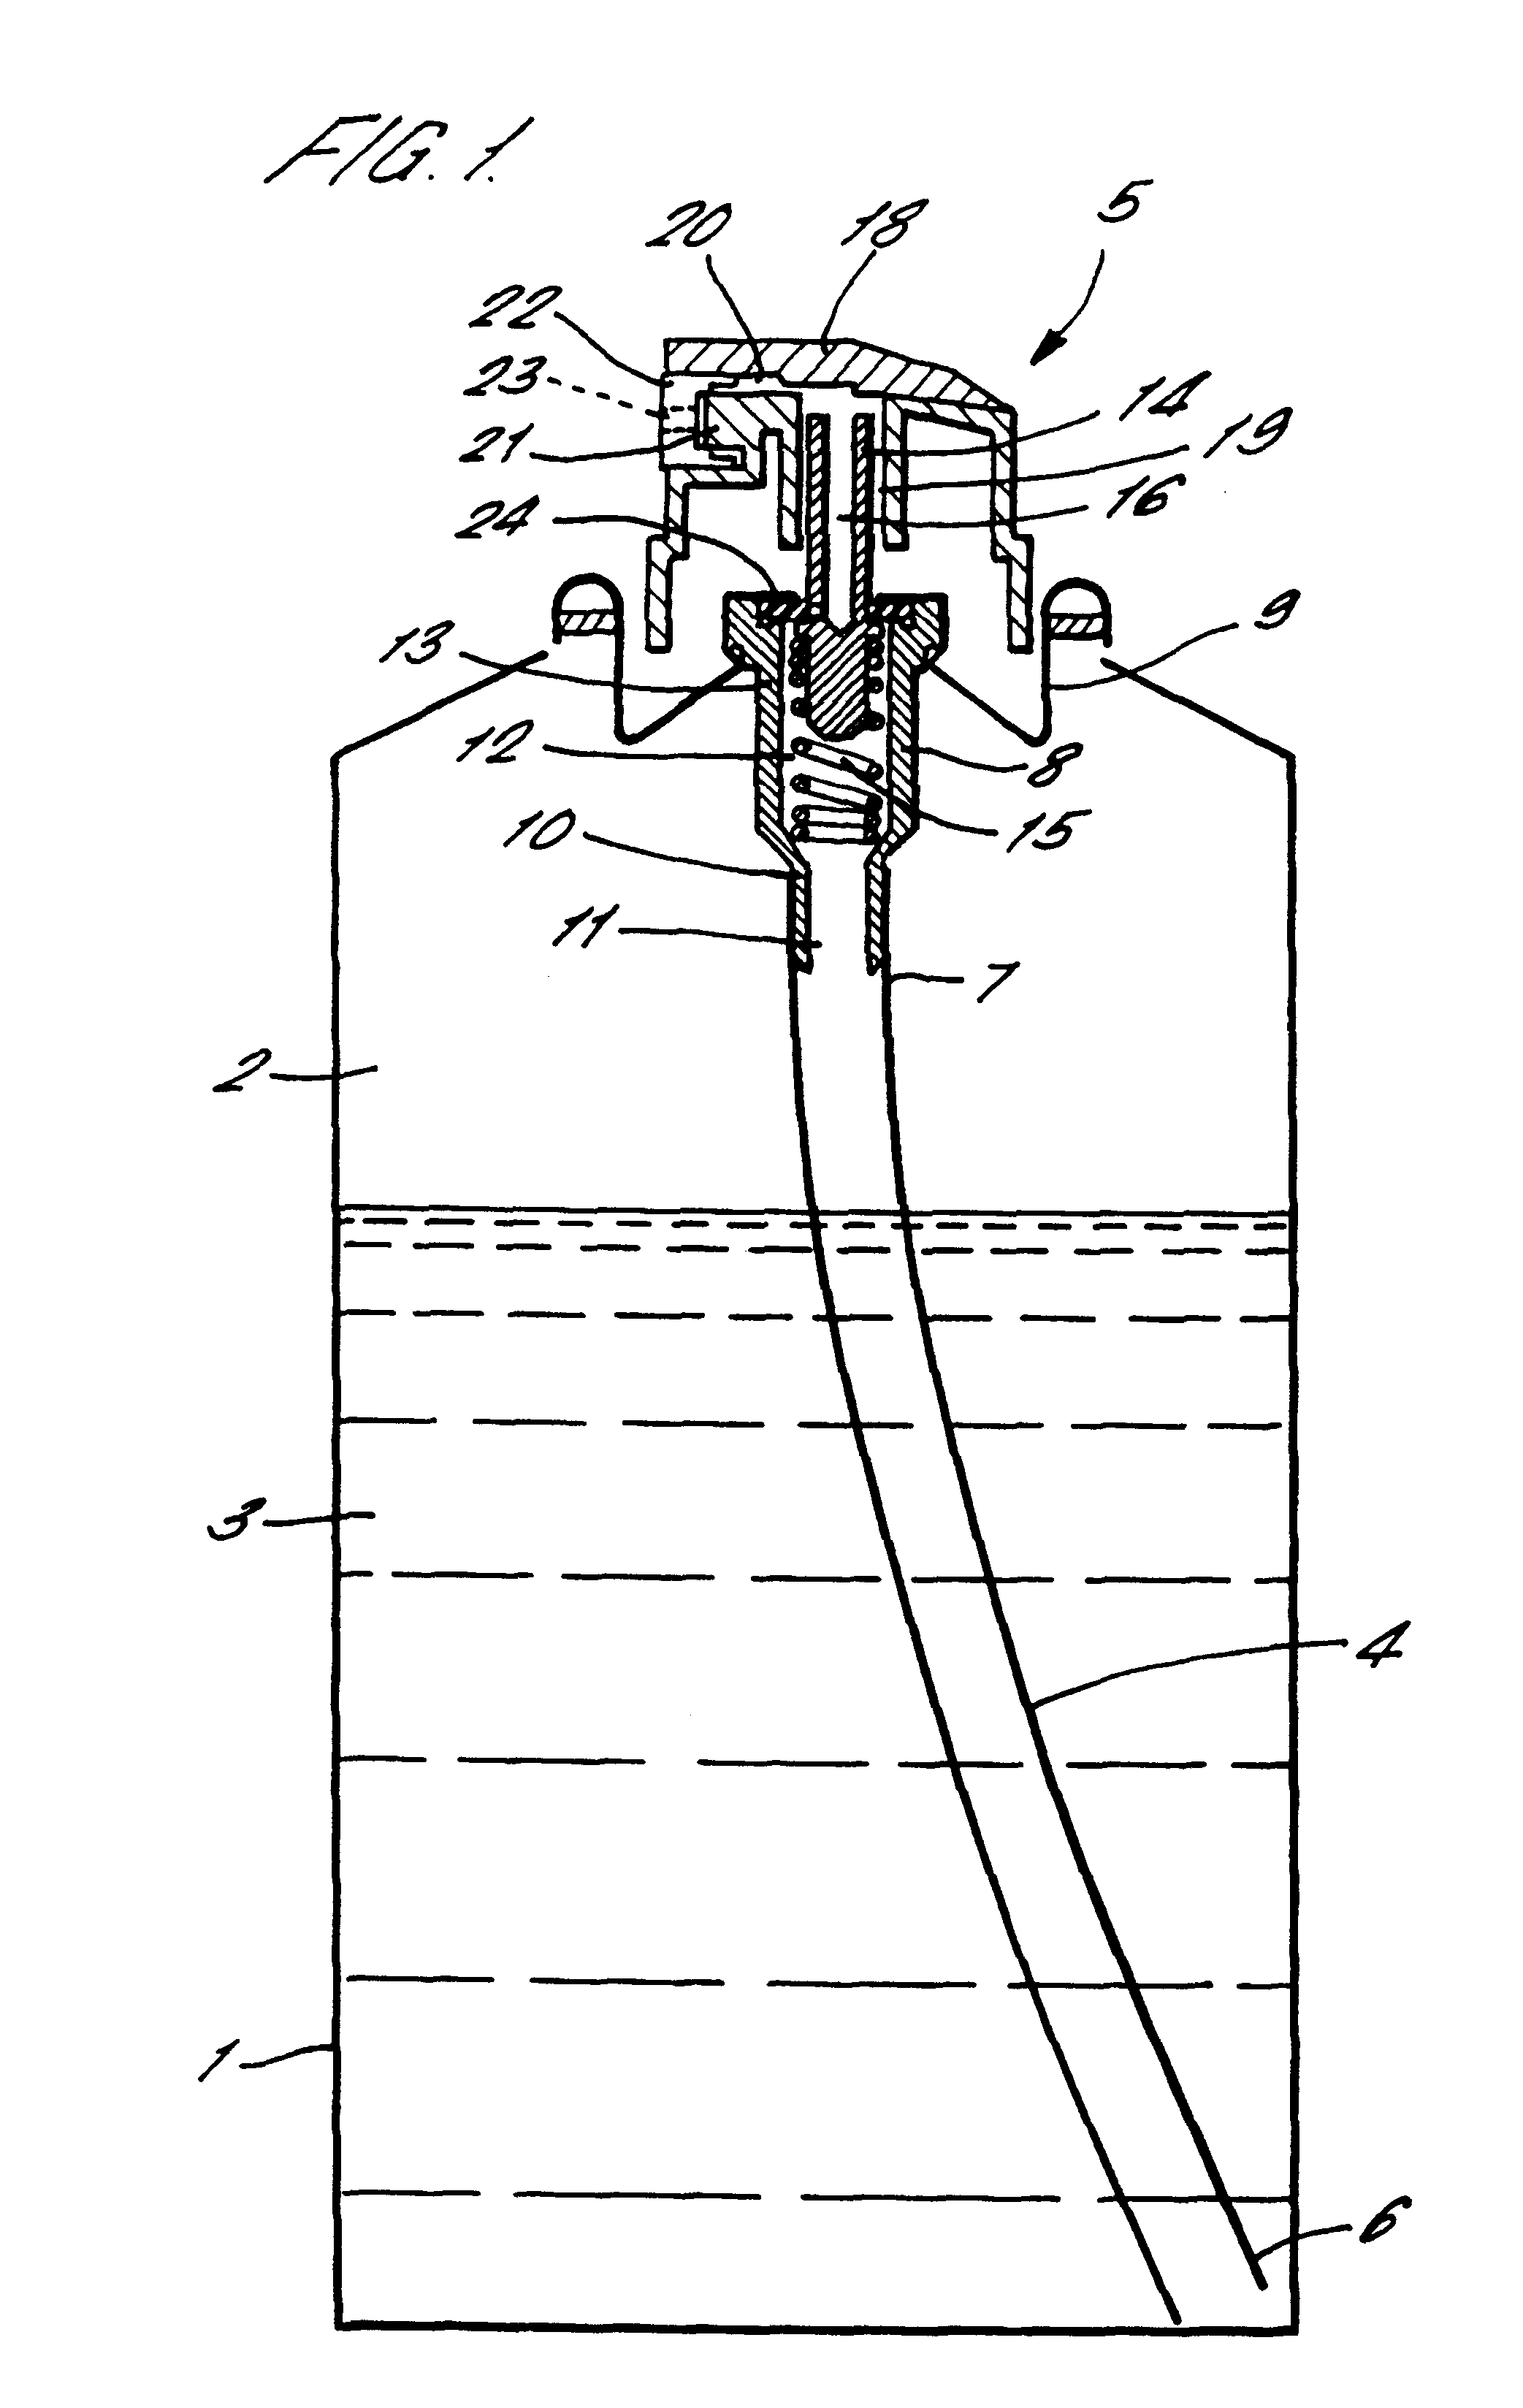 Targeting of flying insects with insecticides and apparatus for charging liquids